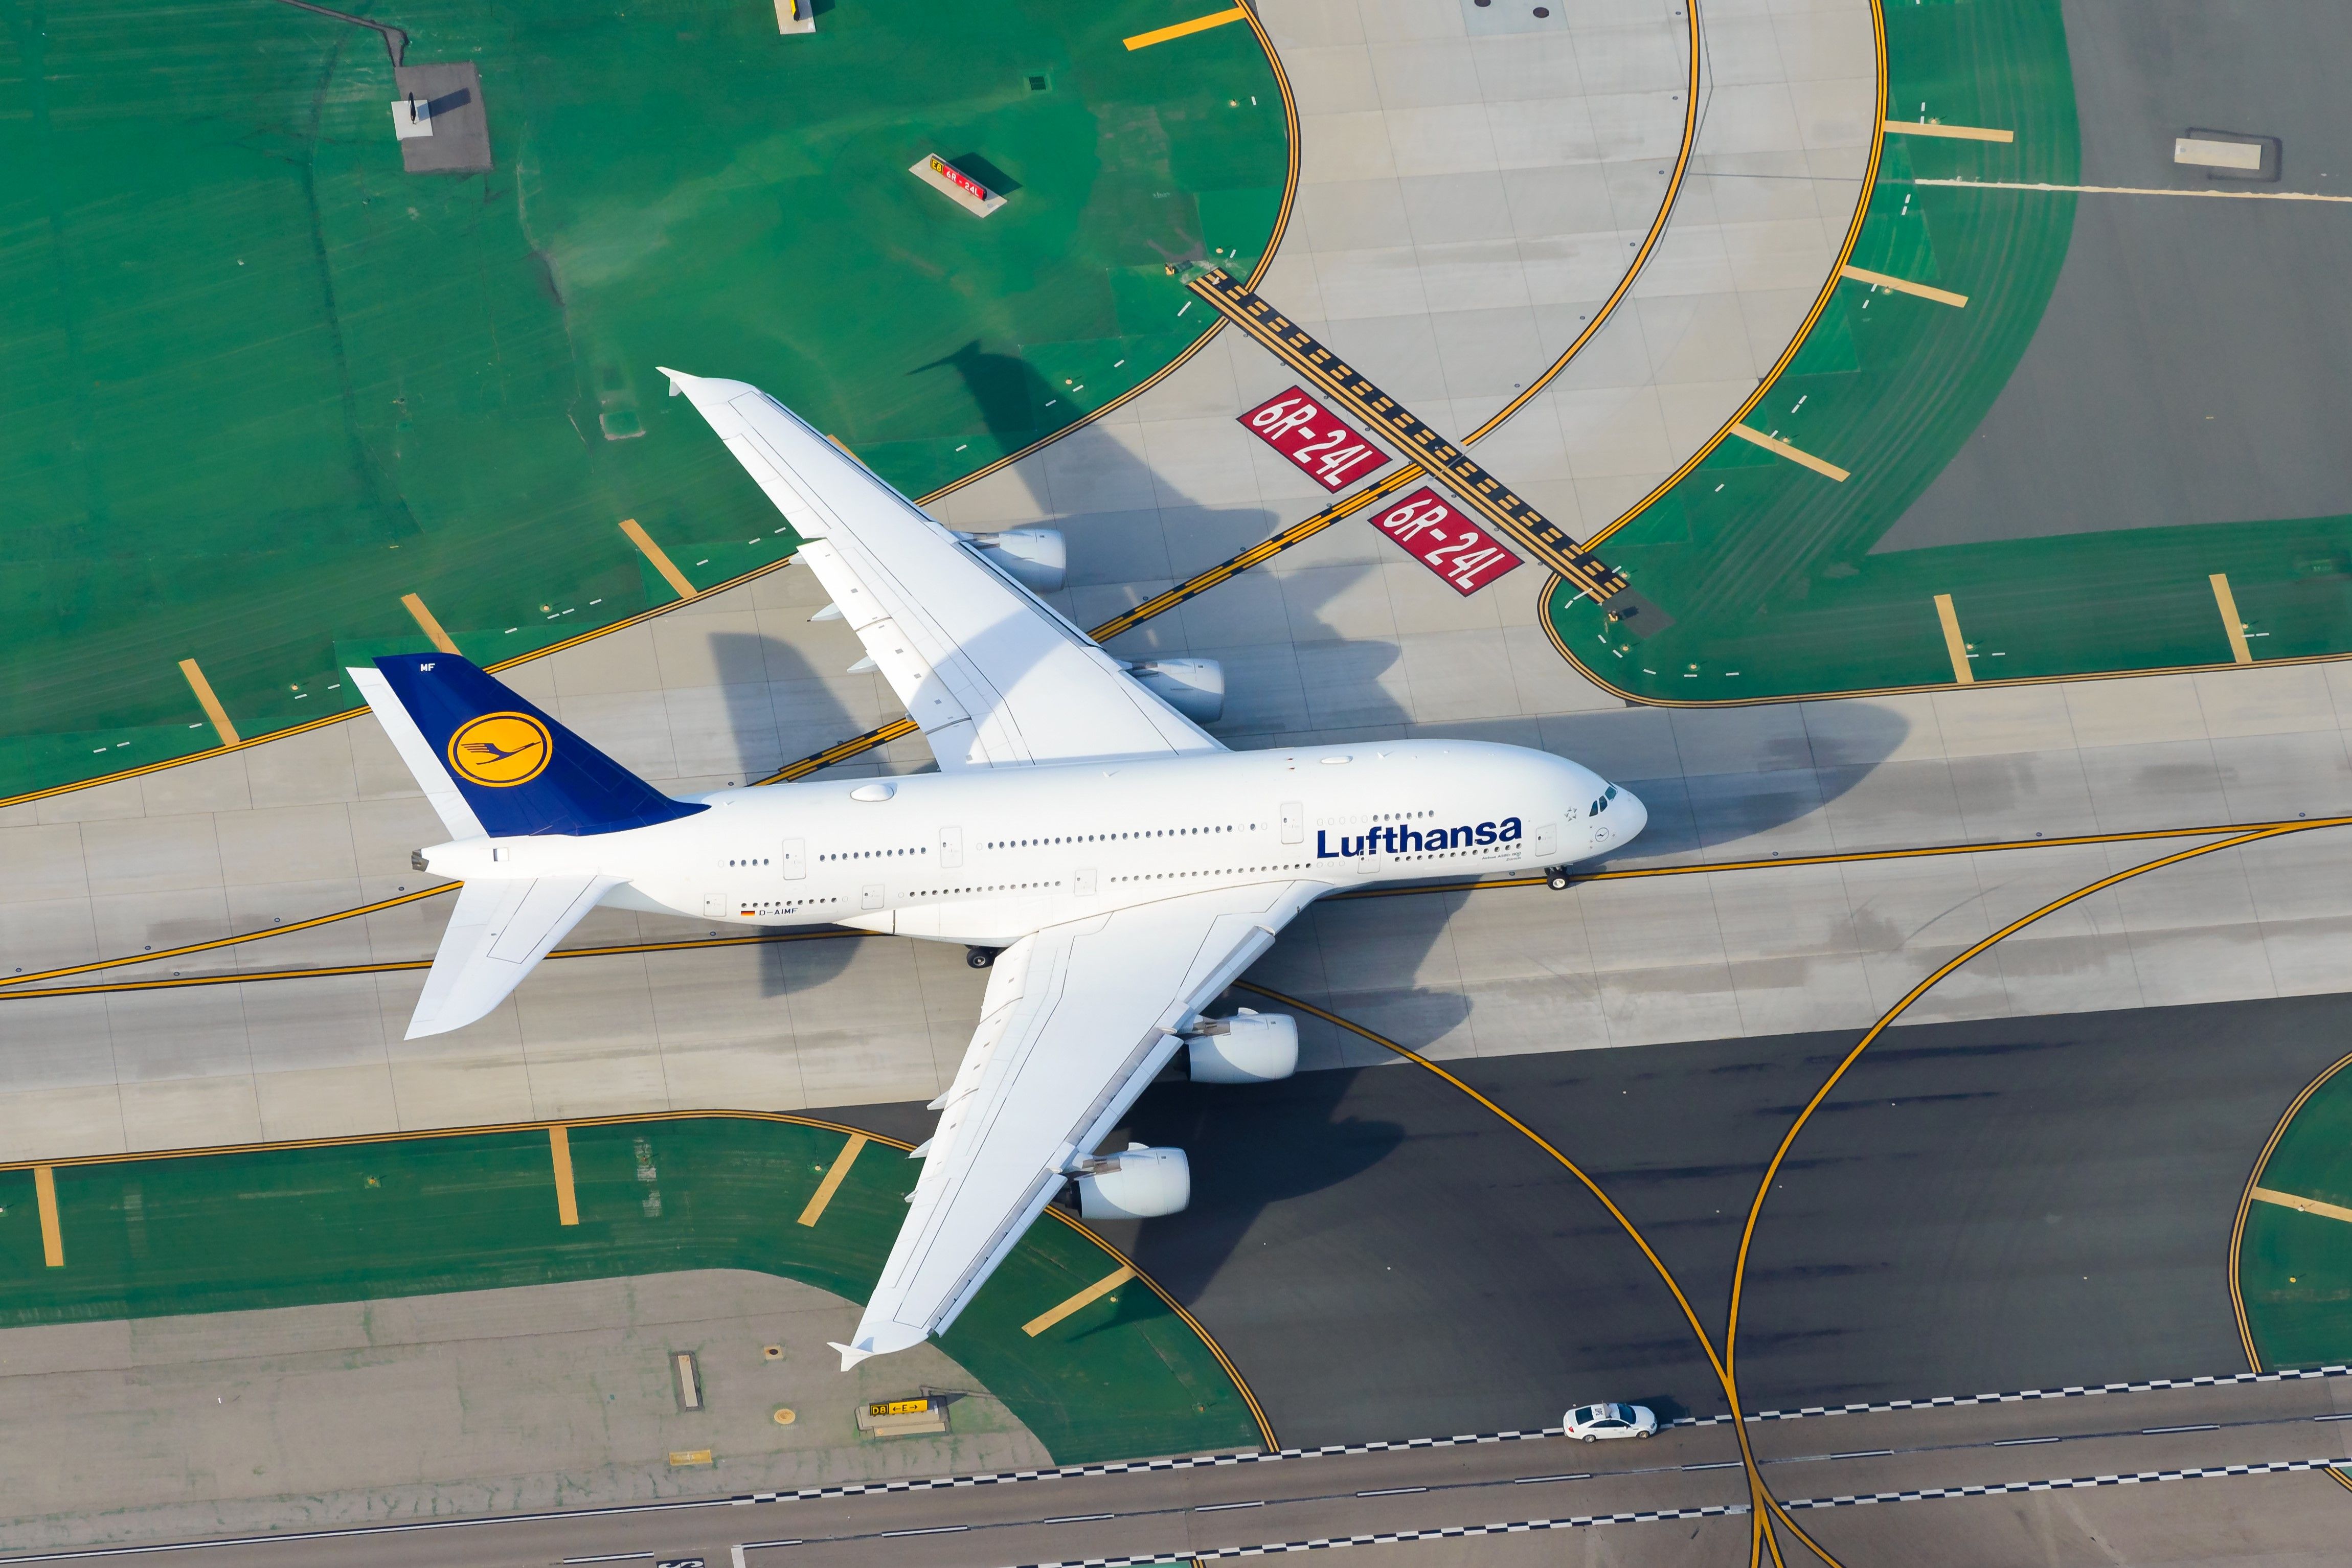 Lufthansa Airbus A380 on the runway at Los Angeles International Airport